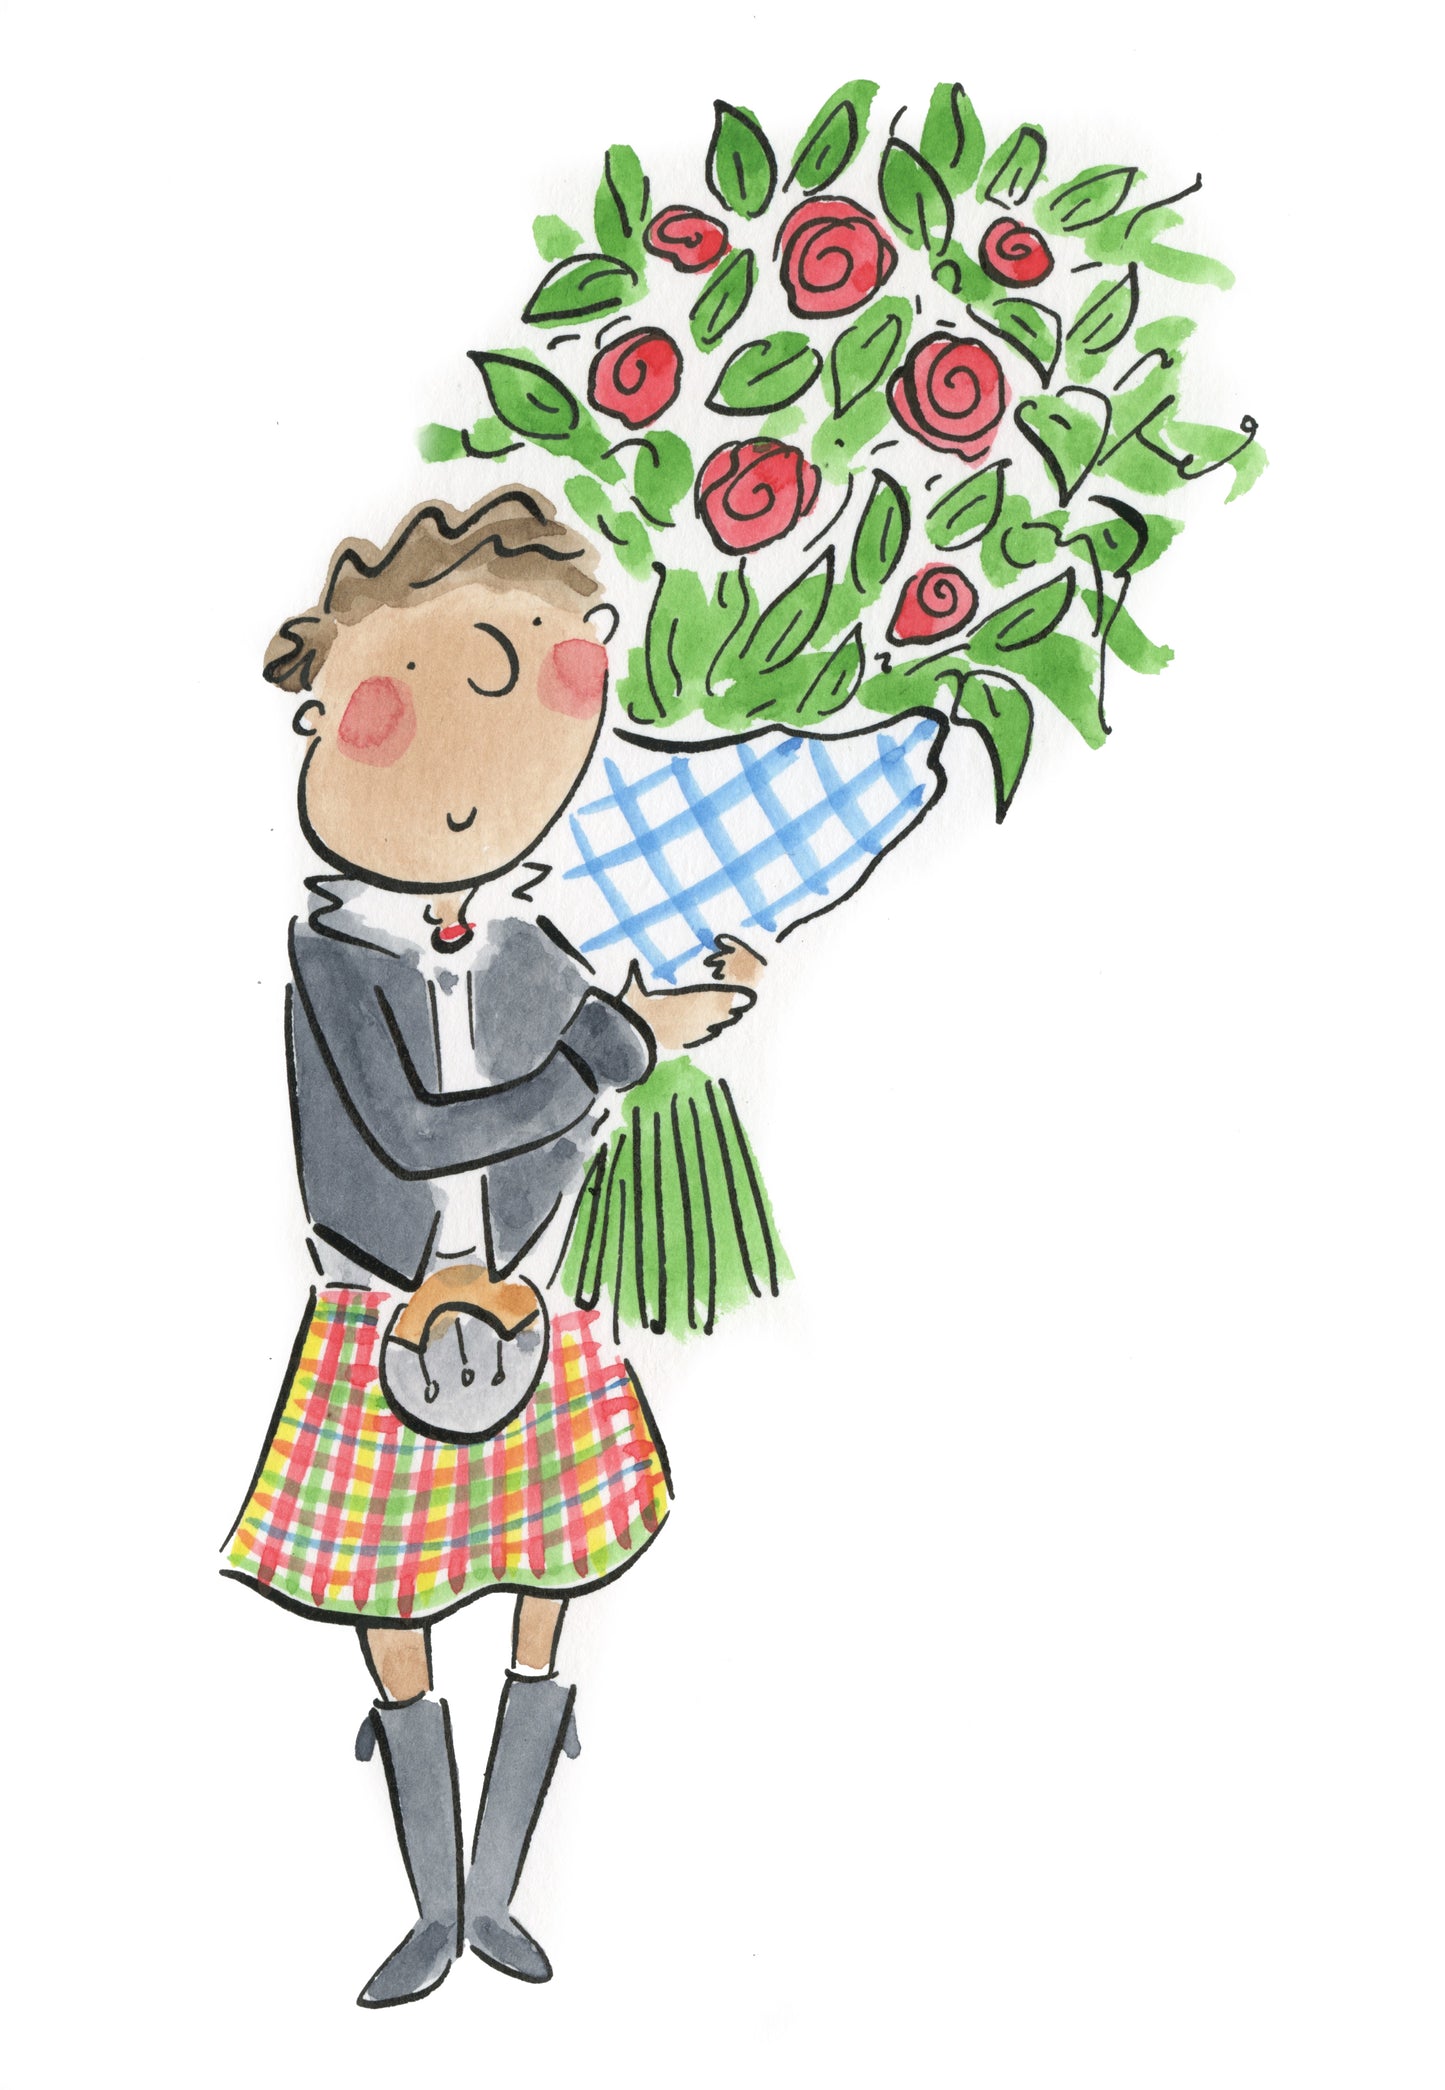 Scotsman with flowers